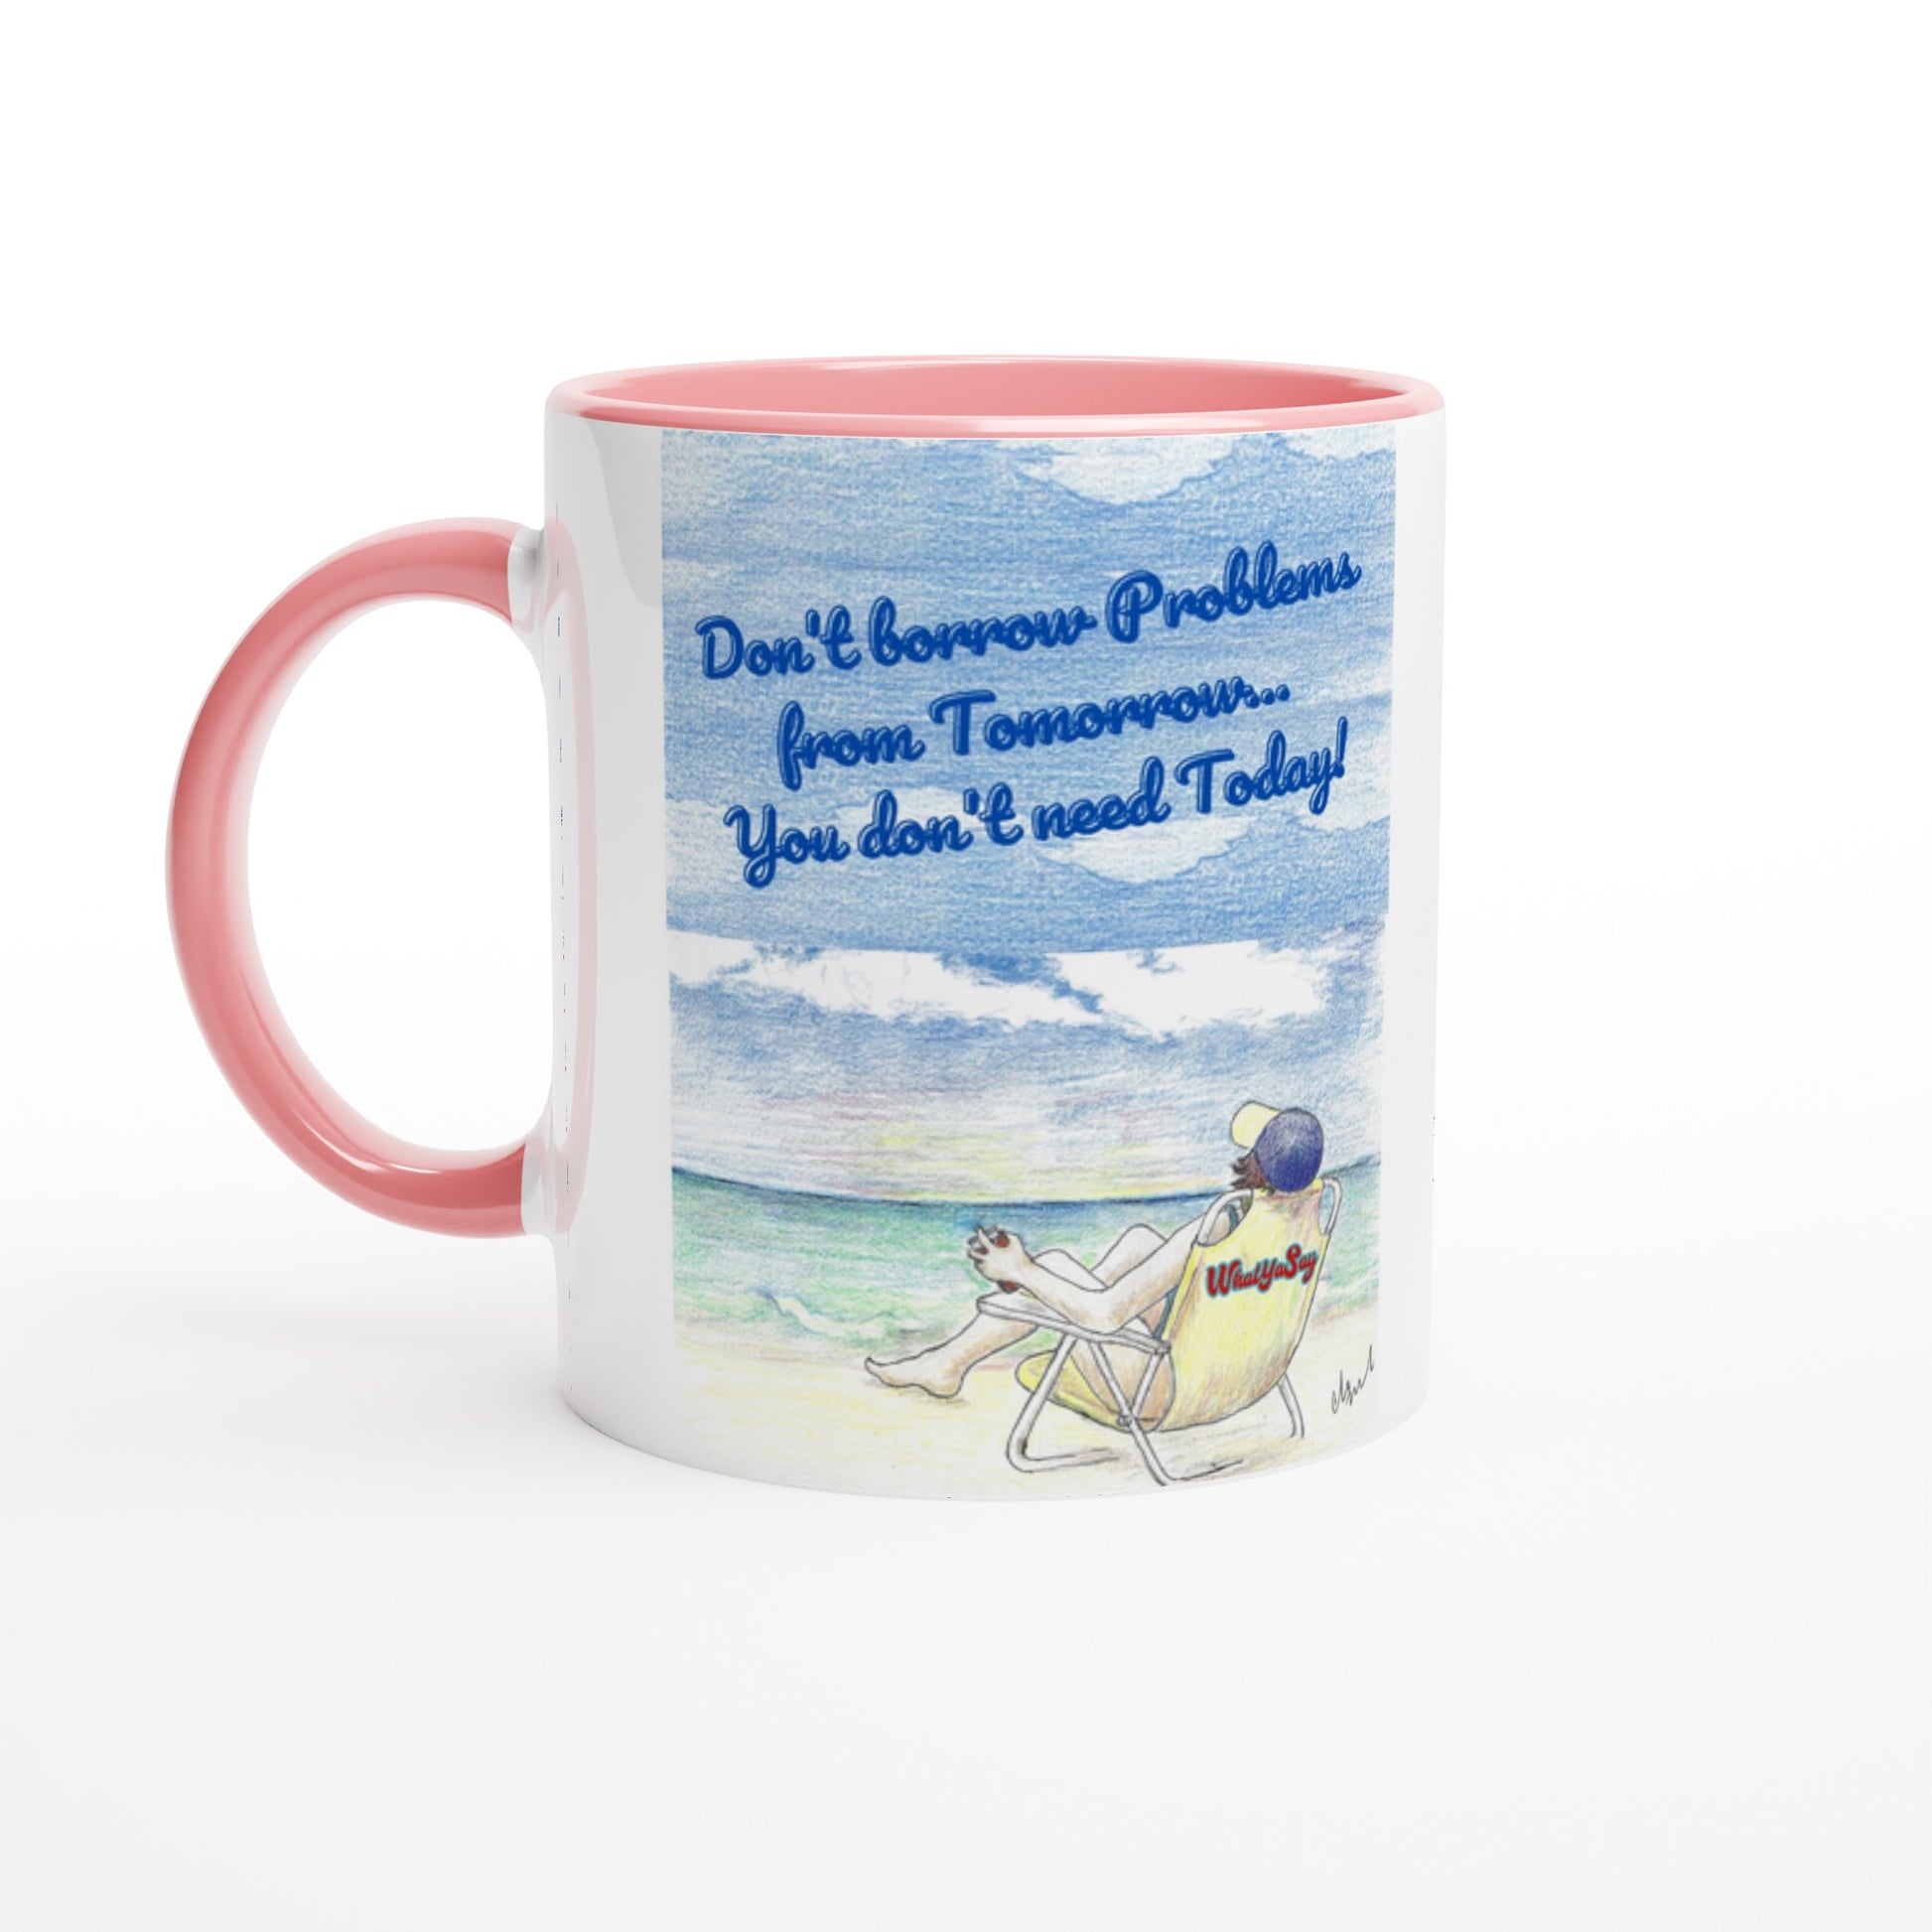 Funny saying Don't borrow Problems from Tomorrow... You don't need Today! 11oz white ceramic mug with pink handle, rim and inside and coffee mug is dishwasher safe and microwave safe.